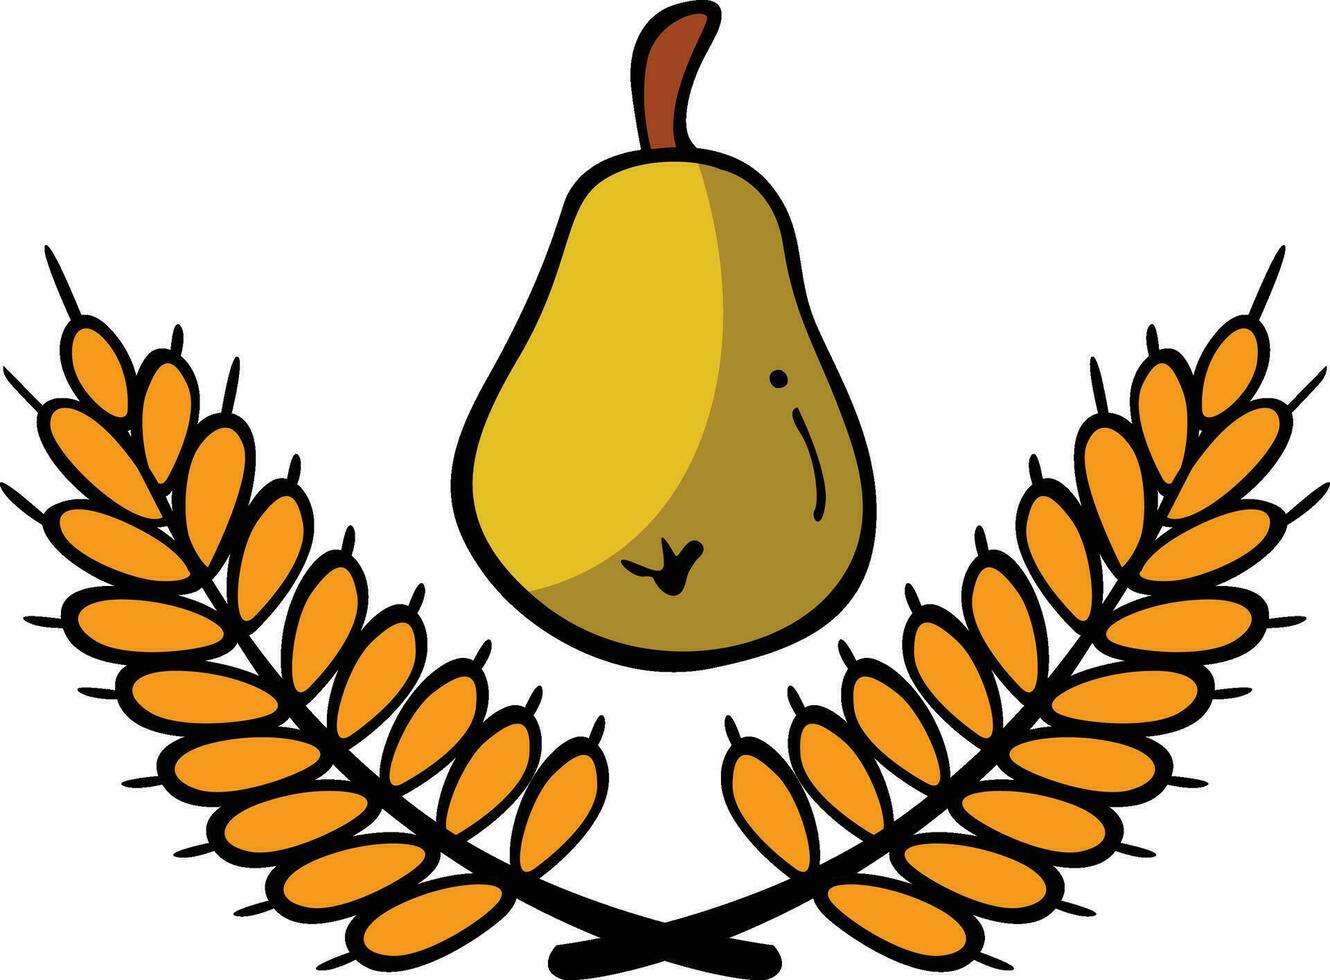 Hand drawn cartoon doodle of pear and ears of wheat vector